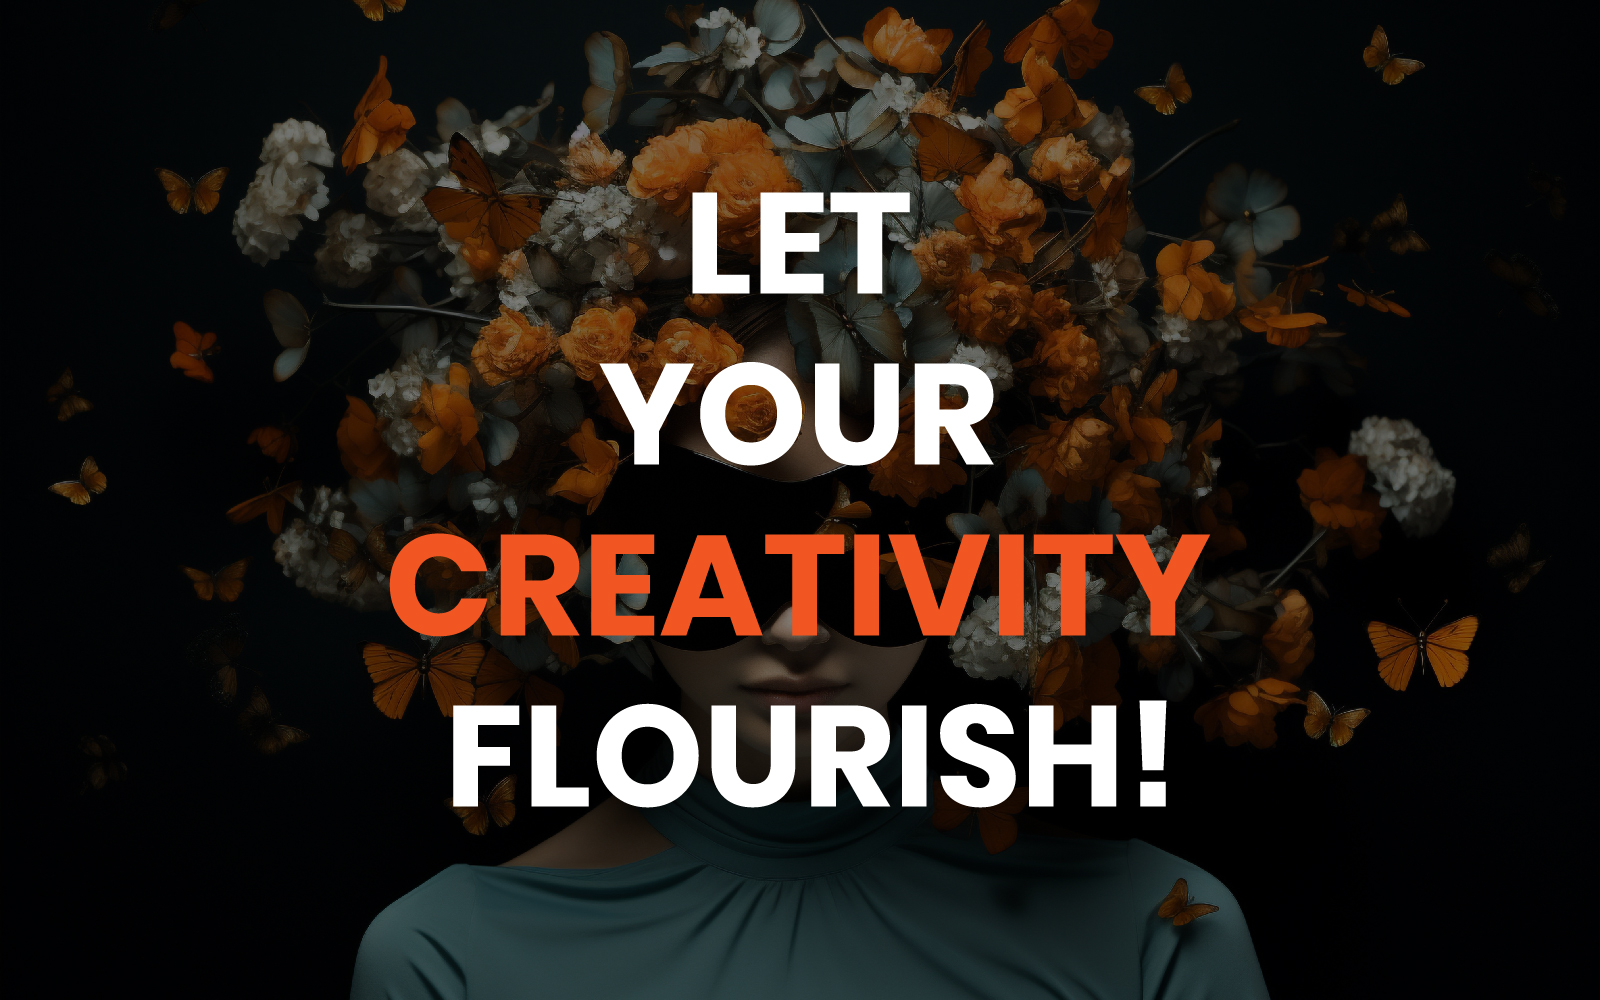  An inspirational poster showing a person with a face covered by orange flowers and butterflies against a dark background, with the text "LET YOUR CREATIVITY FLOURISH!" in bold orange letters.